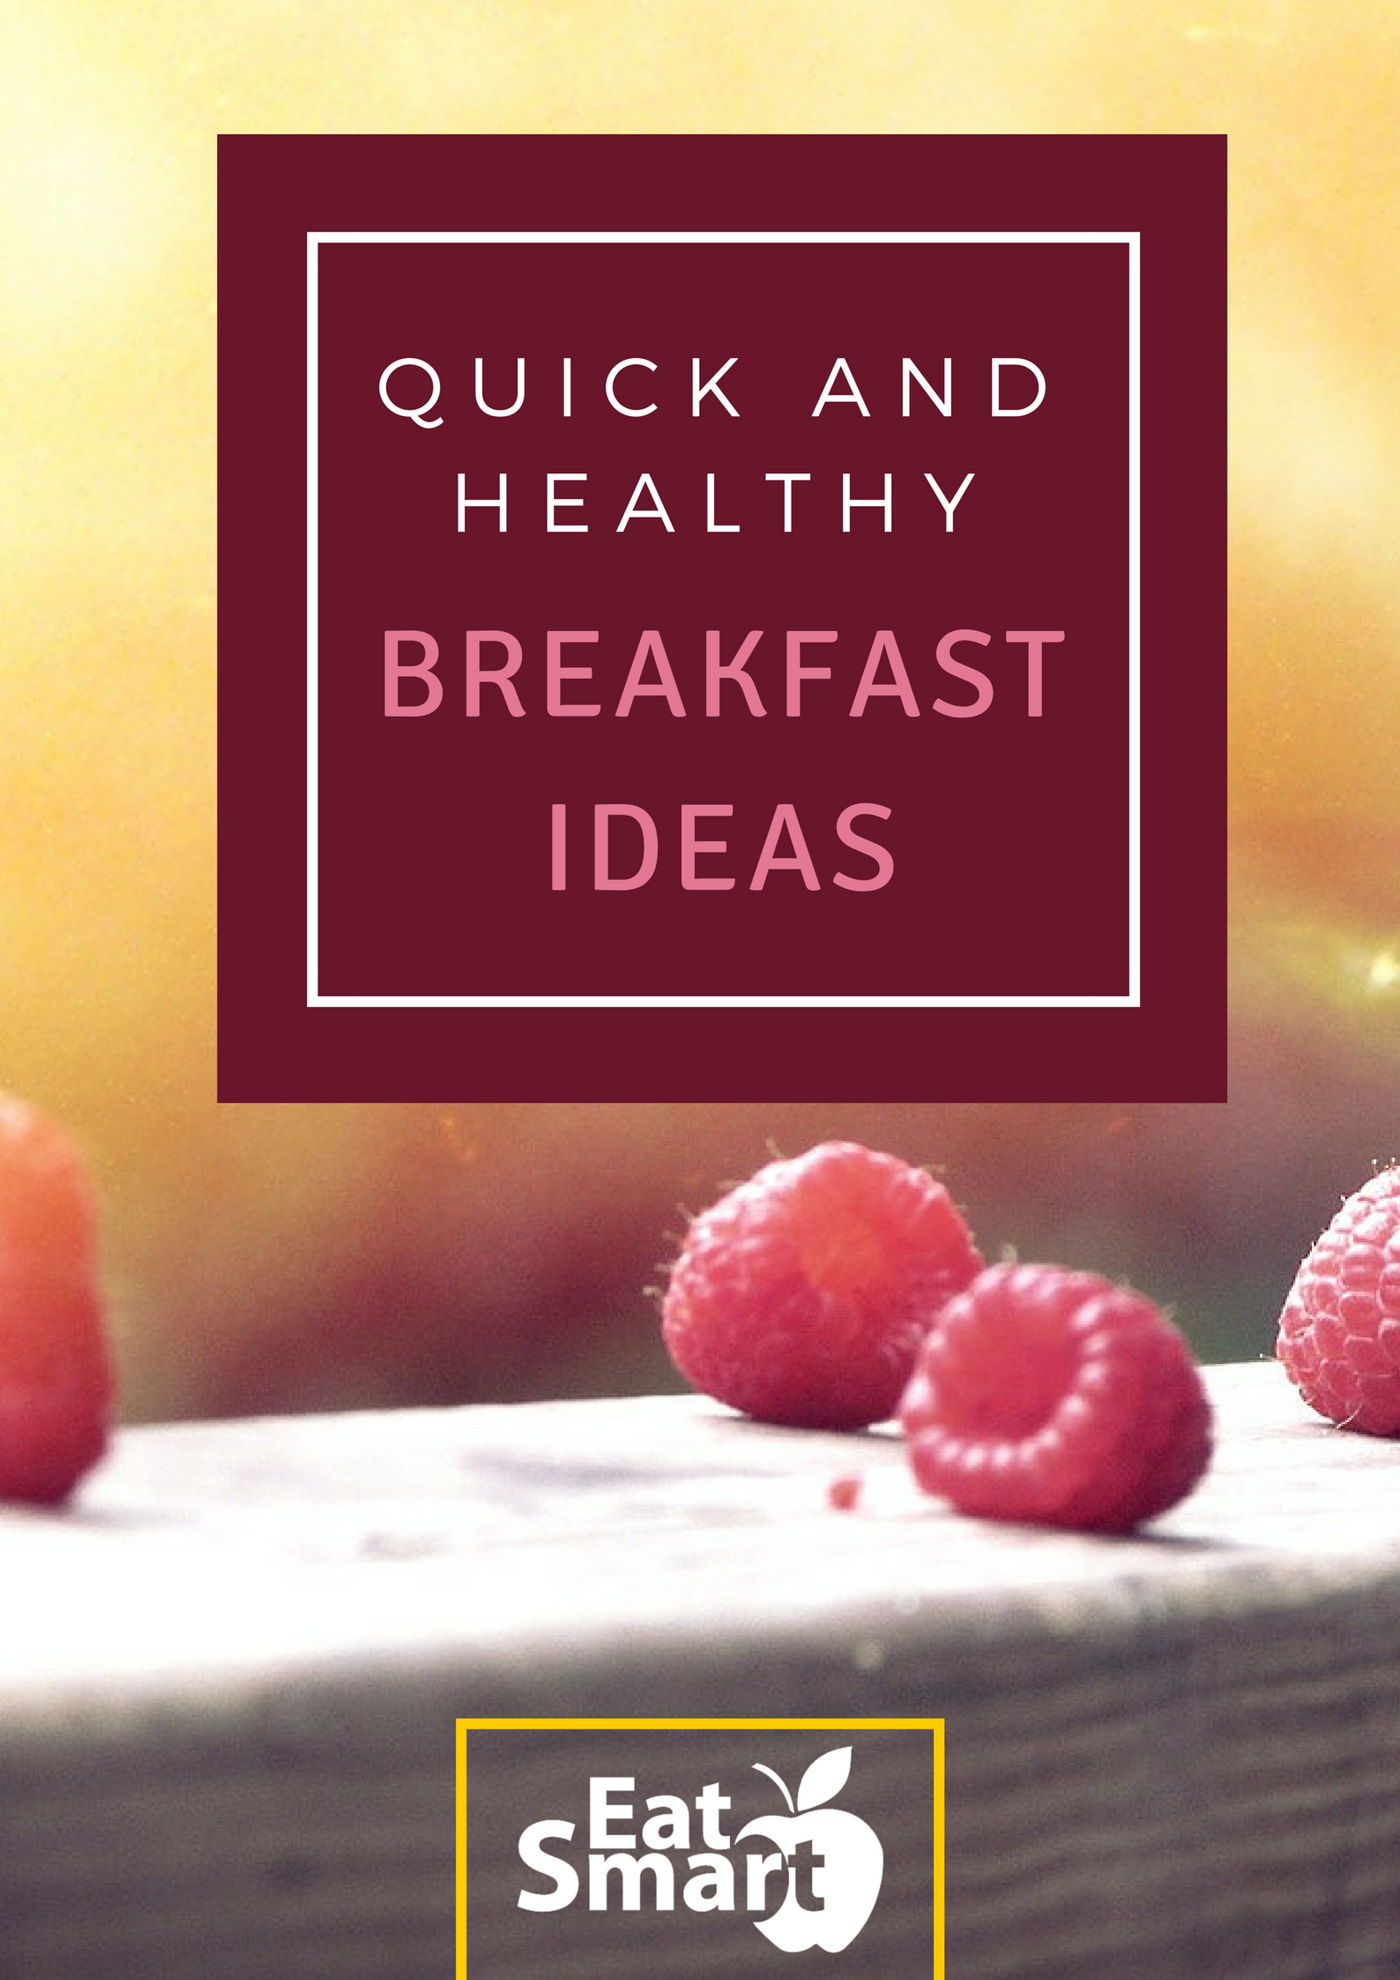 Quick and Healthy Breakfast Ideas for People “On The Go”